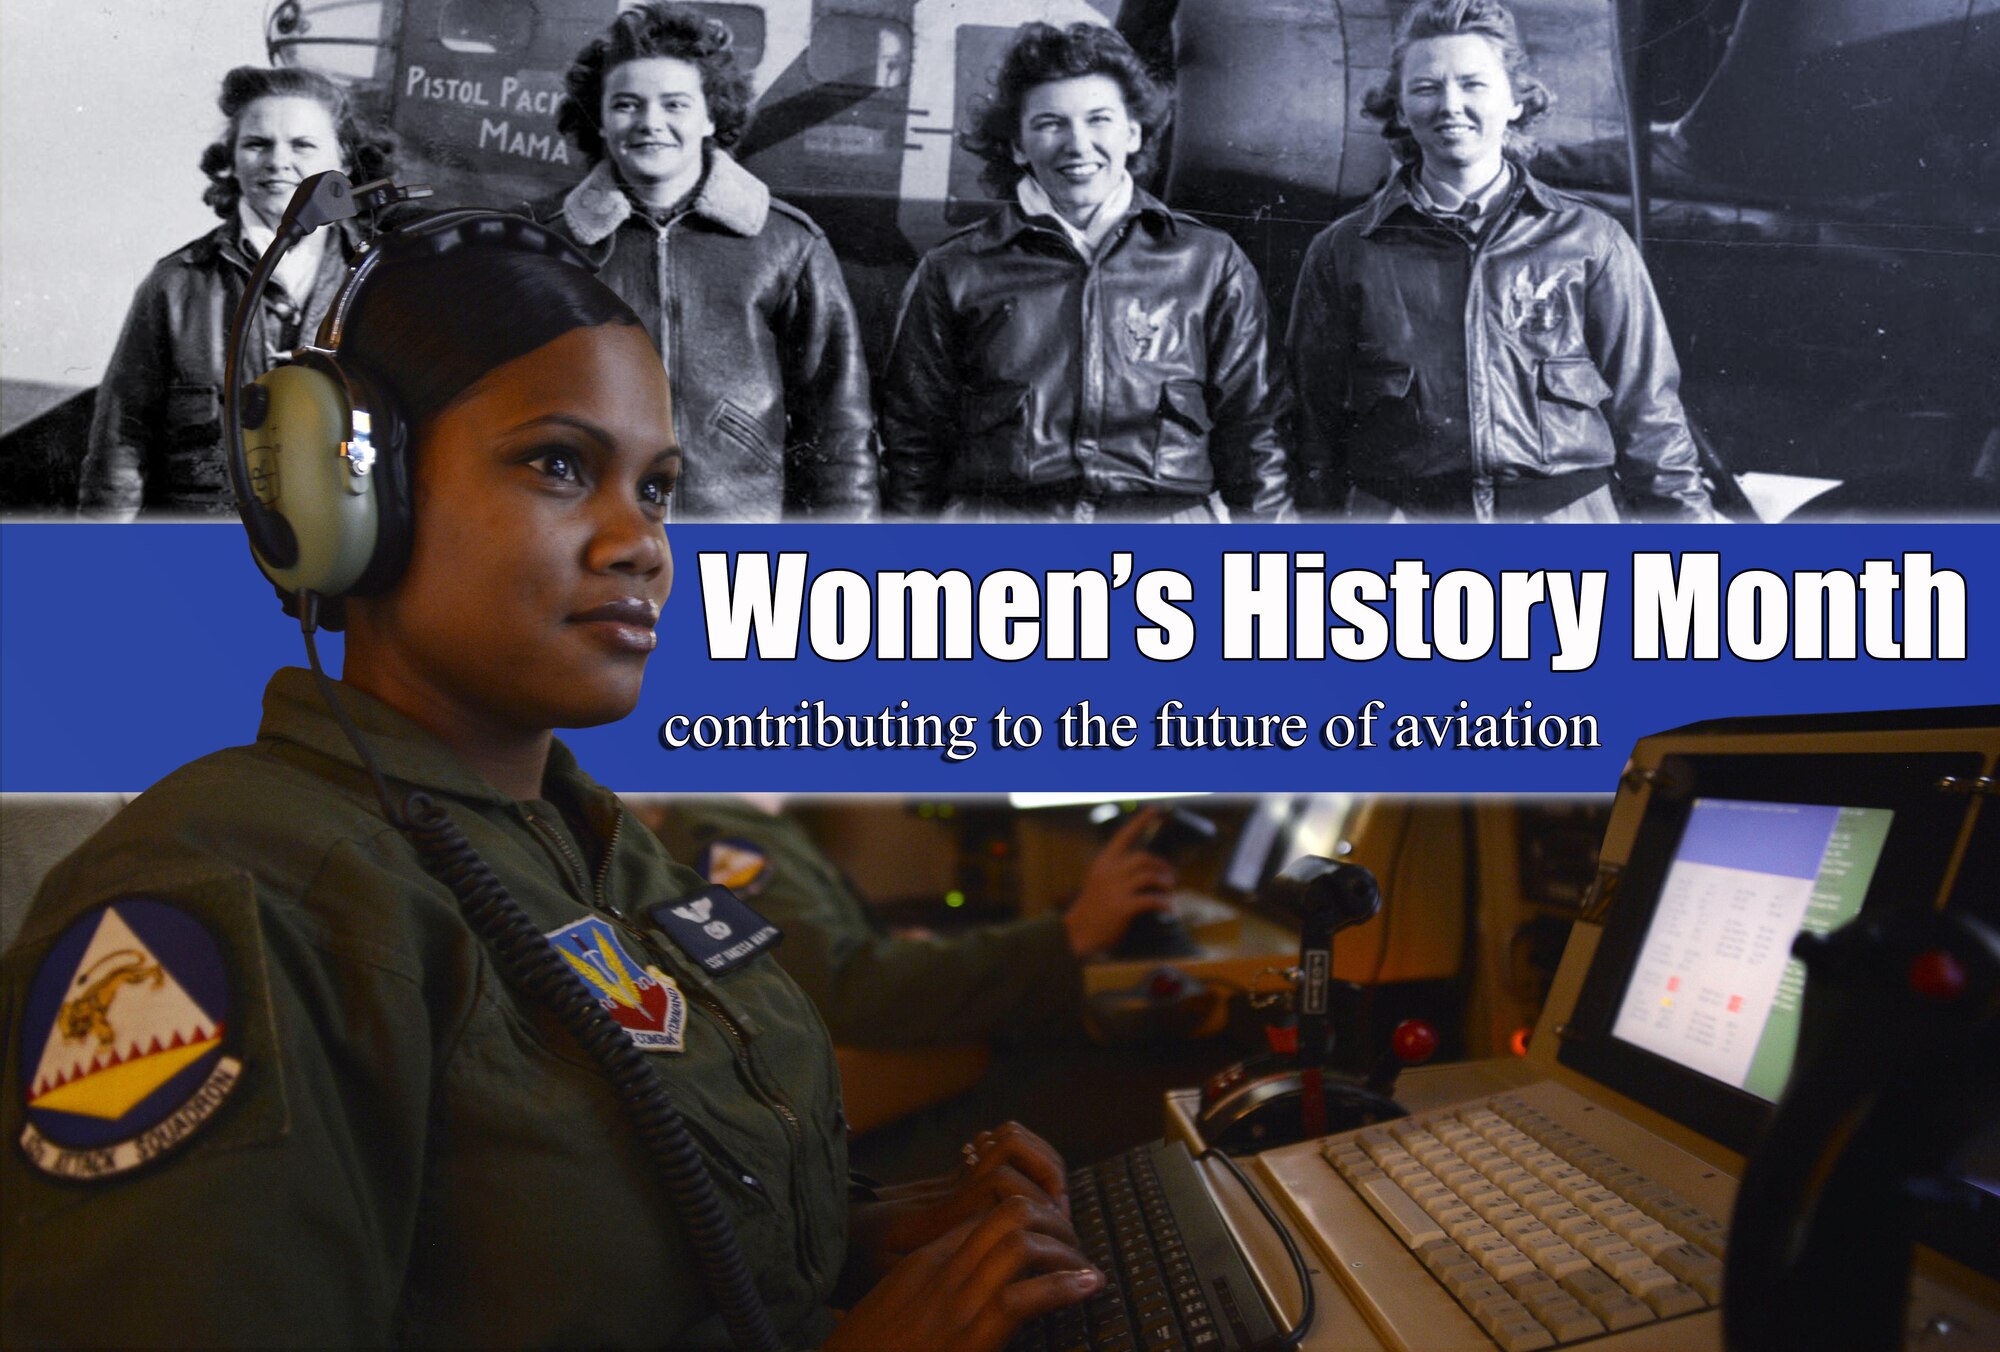 Women’s History Month had its origins as a national celebration in 1981 when Congress authorized and requested the President to proclaim the week beginning March 7, 1982 as “Women’s History Week.” 
In 1987, Congress designated the month of March 1987 as “Women’s History Month.” Since 1995, Presidents Clinton, Bush and Obama have issued a series of annual proclamations designating the month of March as “Women’s History Month.” (Photo illustration by Tech. Sgt. Nadine Y. Barclay/RELEASED)
